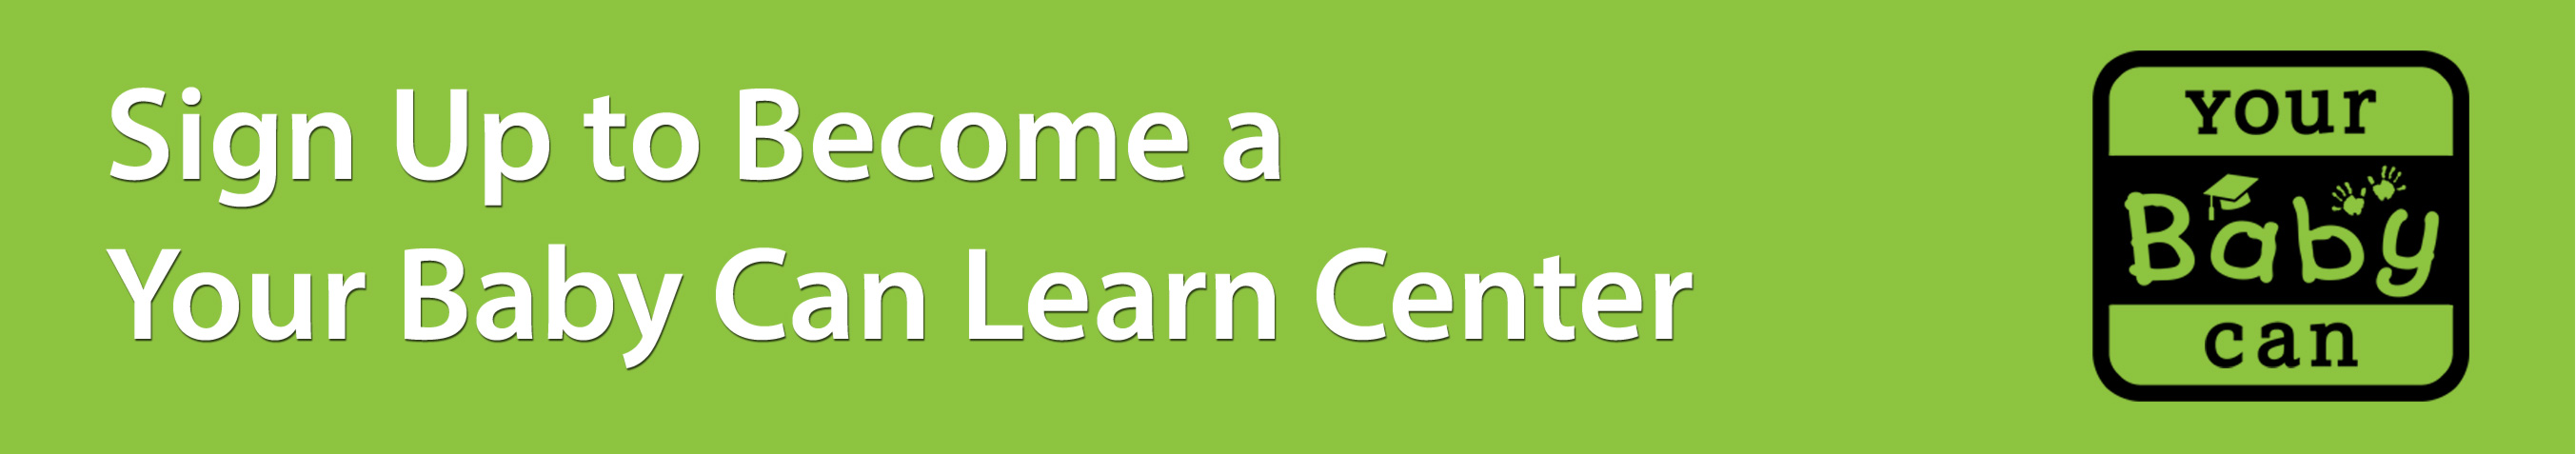 Sign Up to Be a Your Baby Can Learn Center